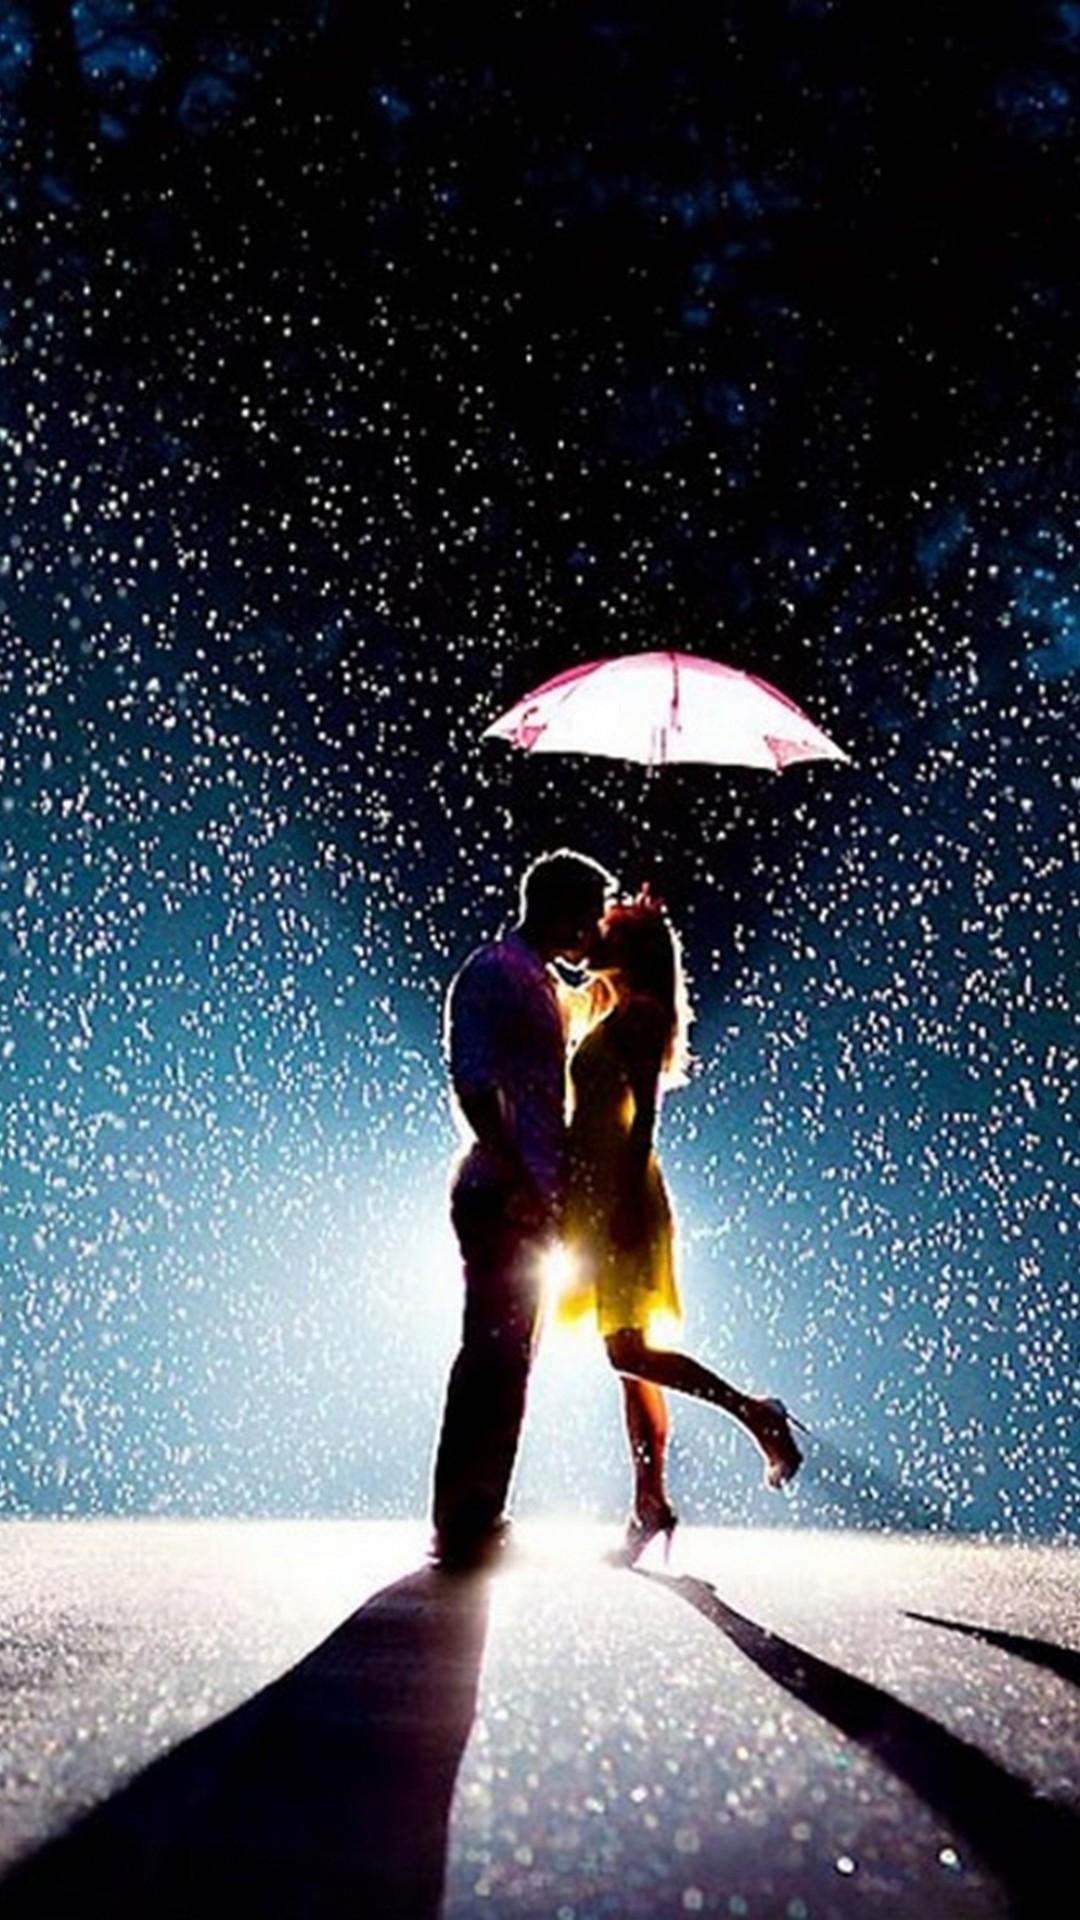 Free download Romantic Love Couple in Rain iPhone wallpapers 2019